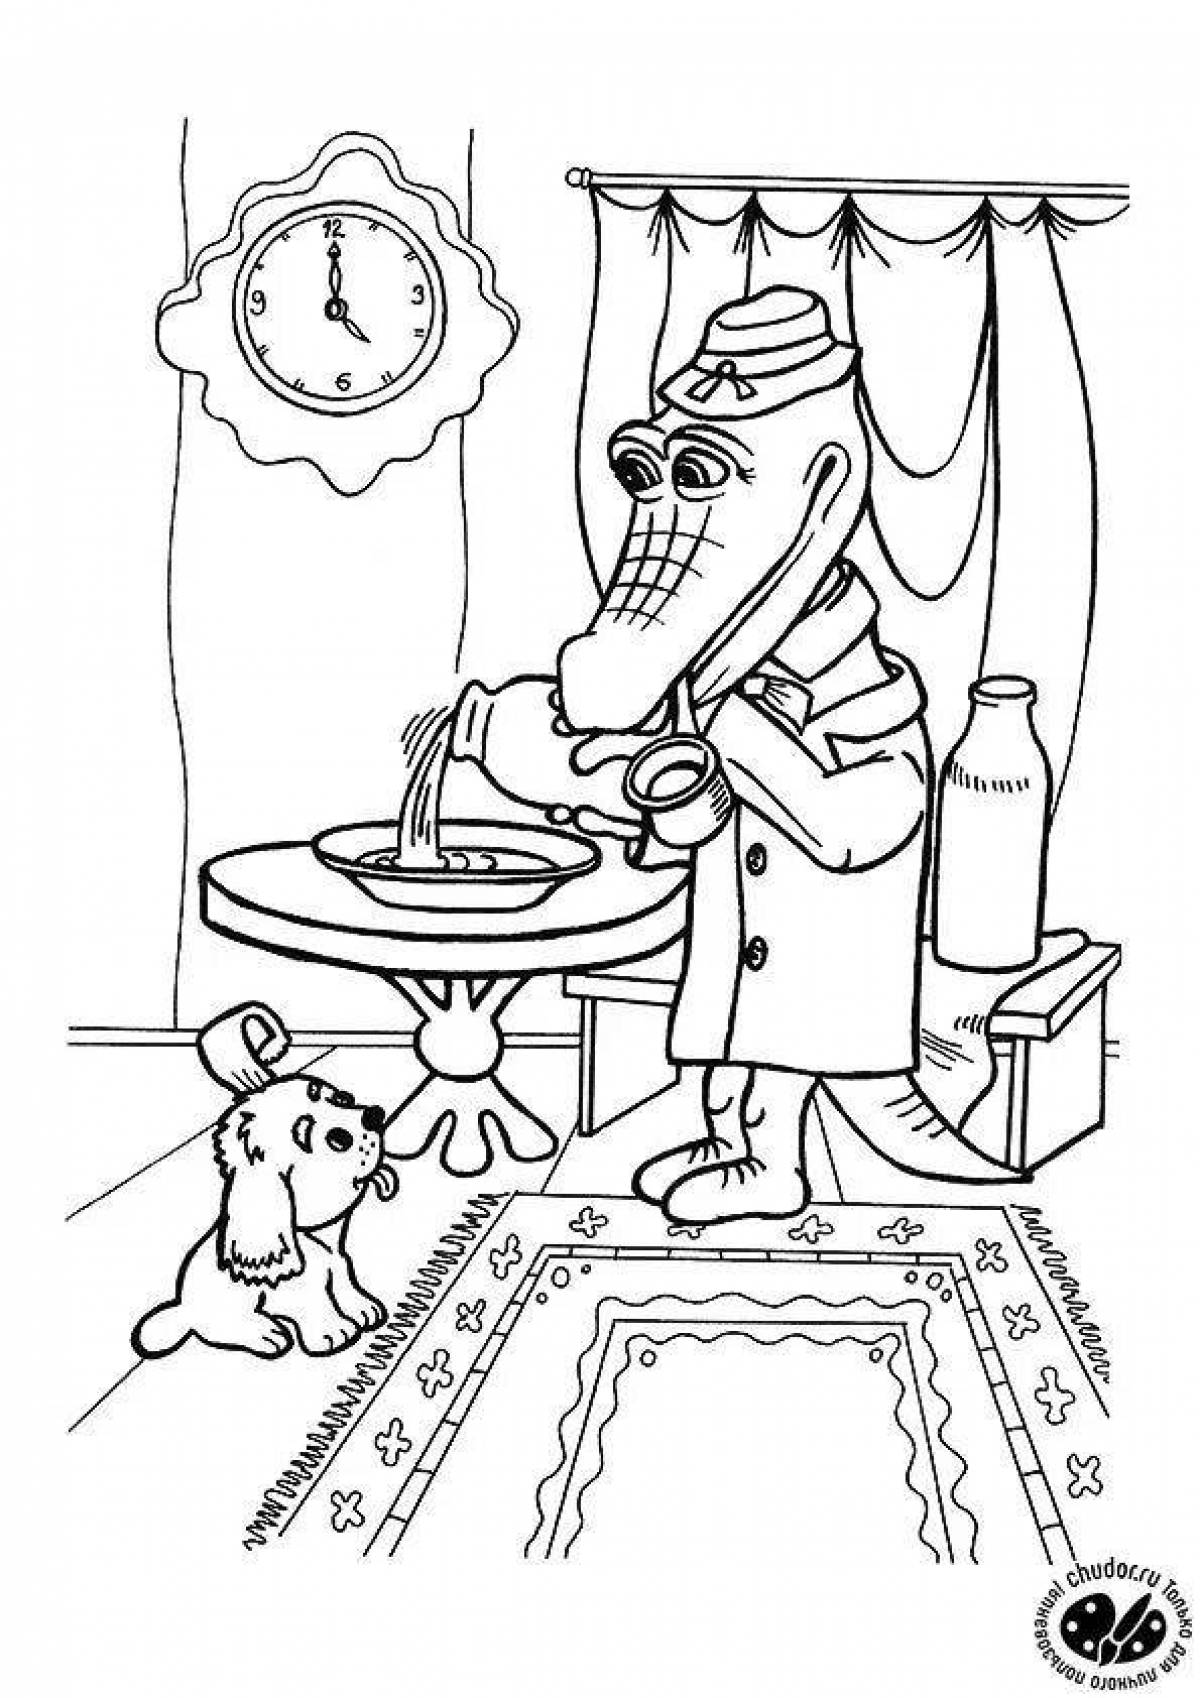 Charming gene coloring page